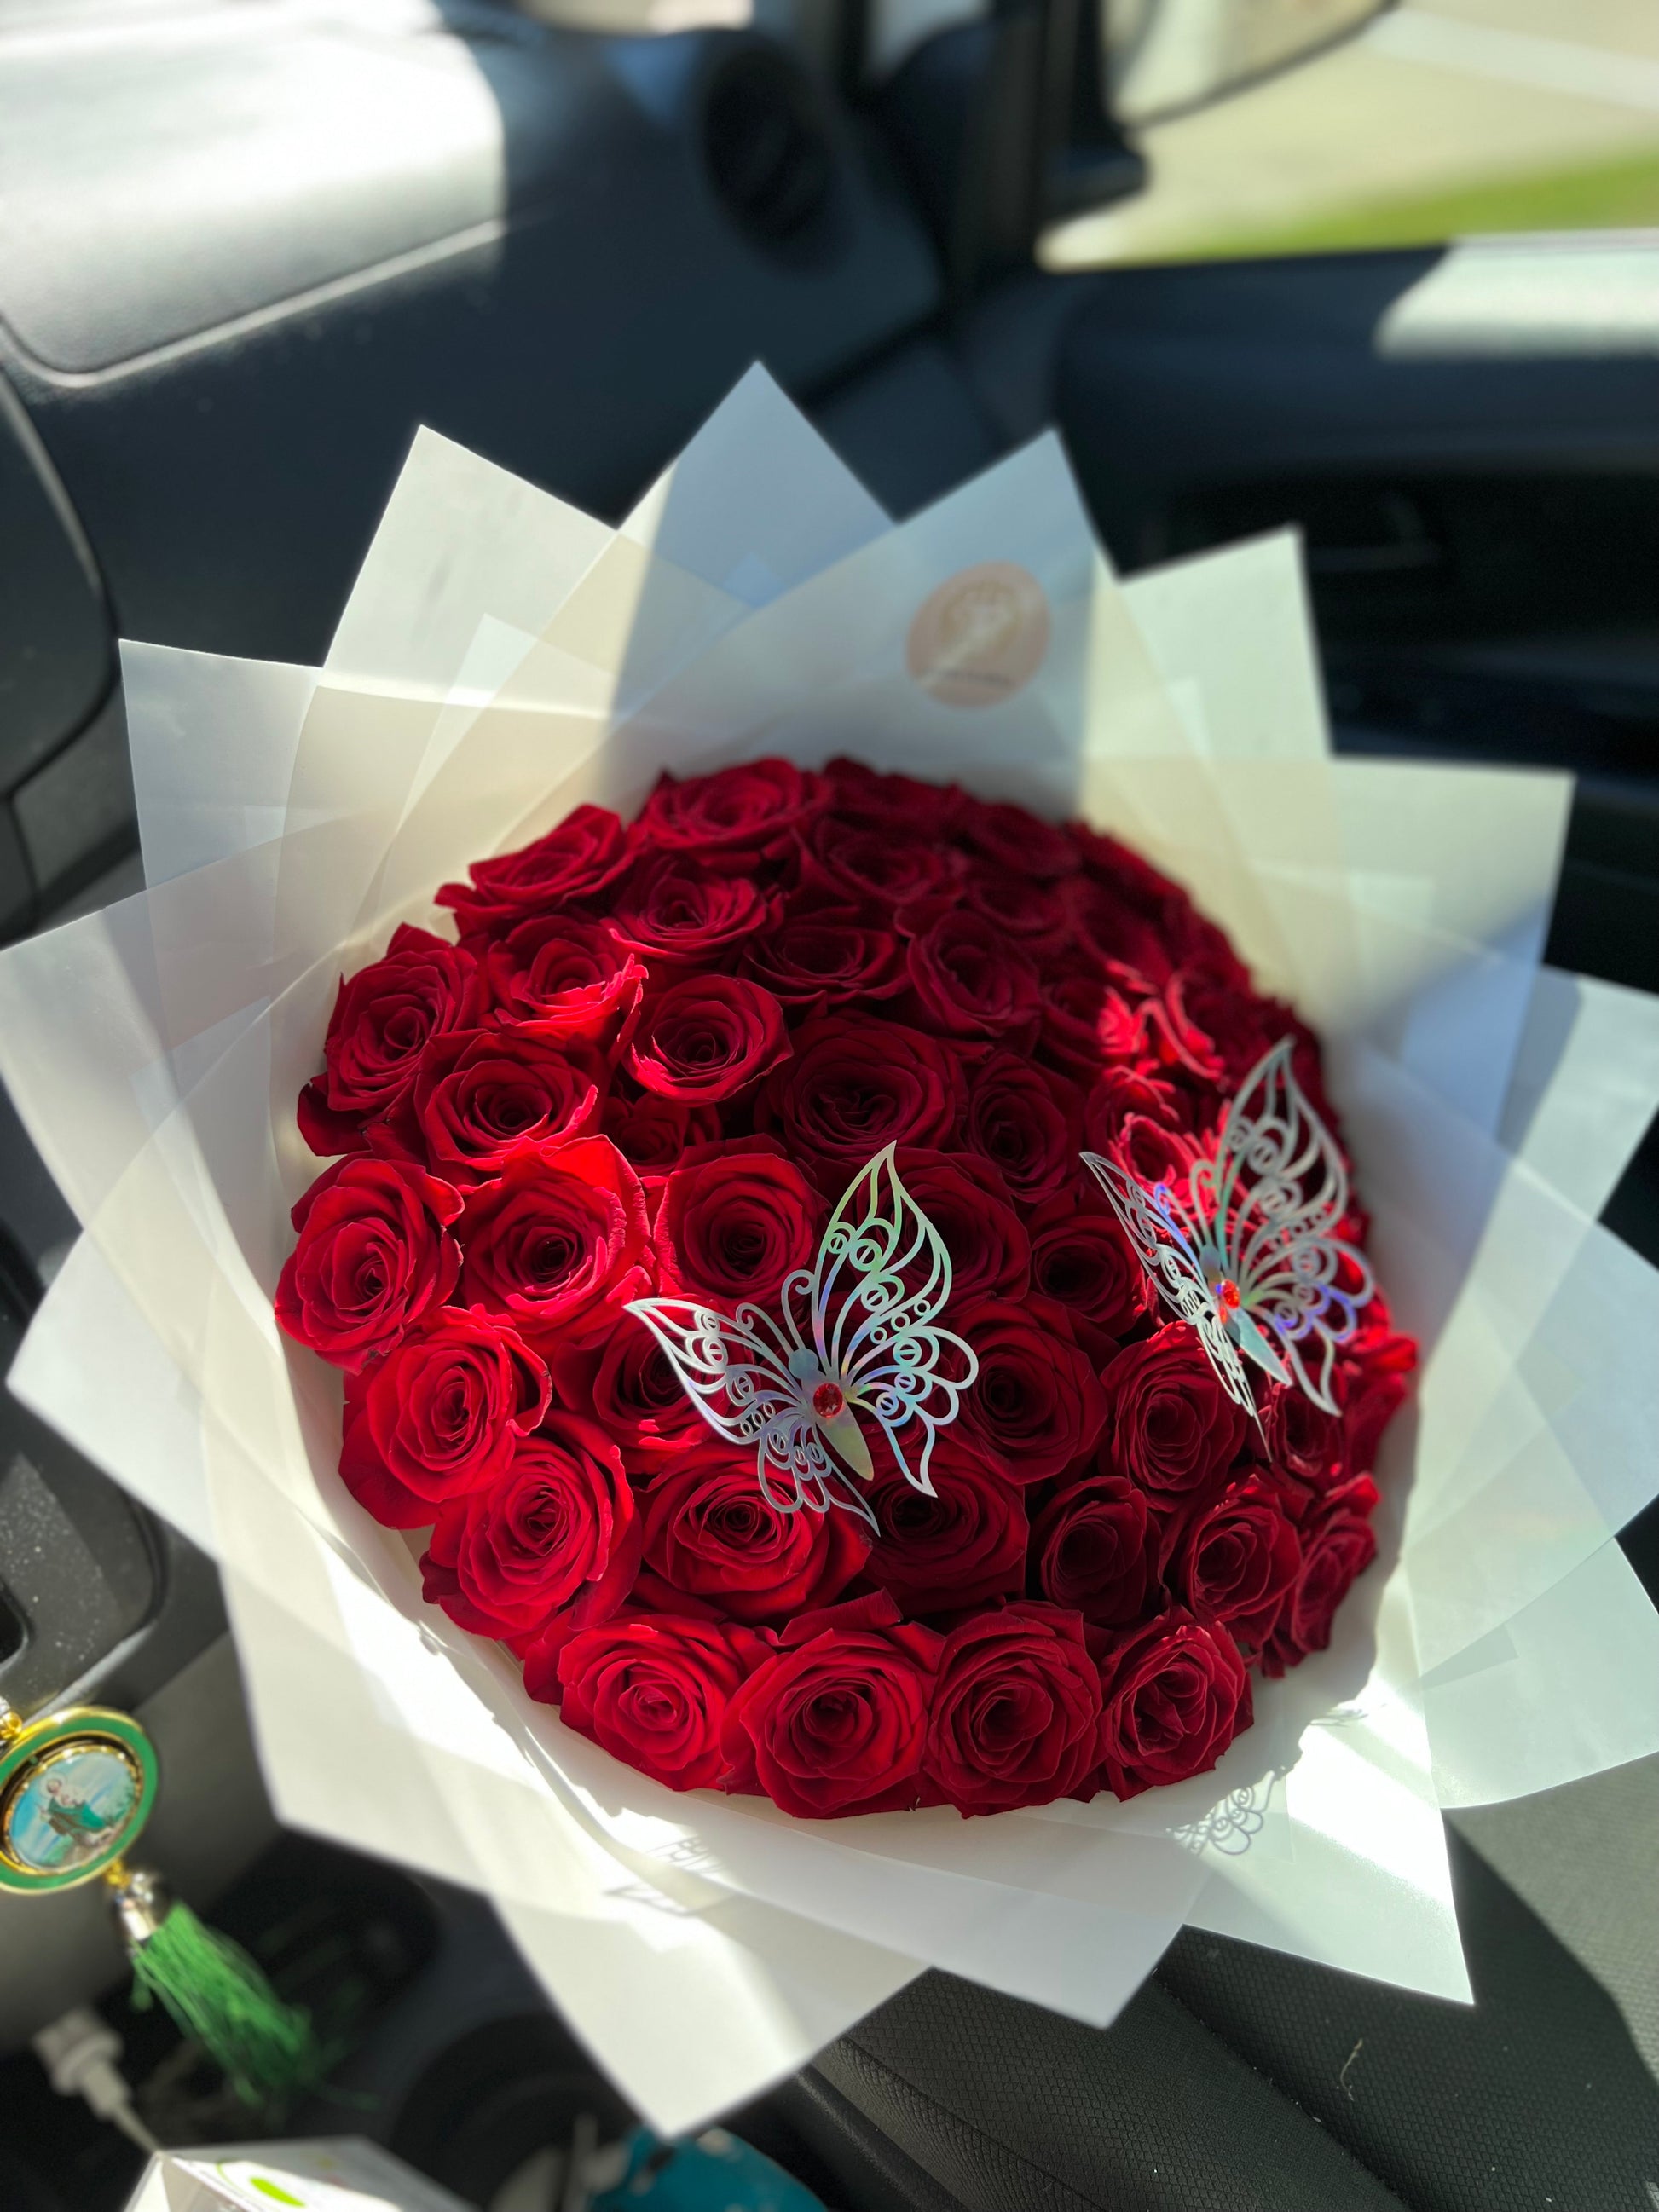 BD001 Stunning and Luxurious Red Roses Bouquet - Ramo Buchon de Rosas Rojas  - Love Flowers Miami